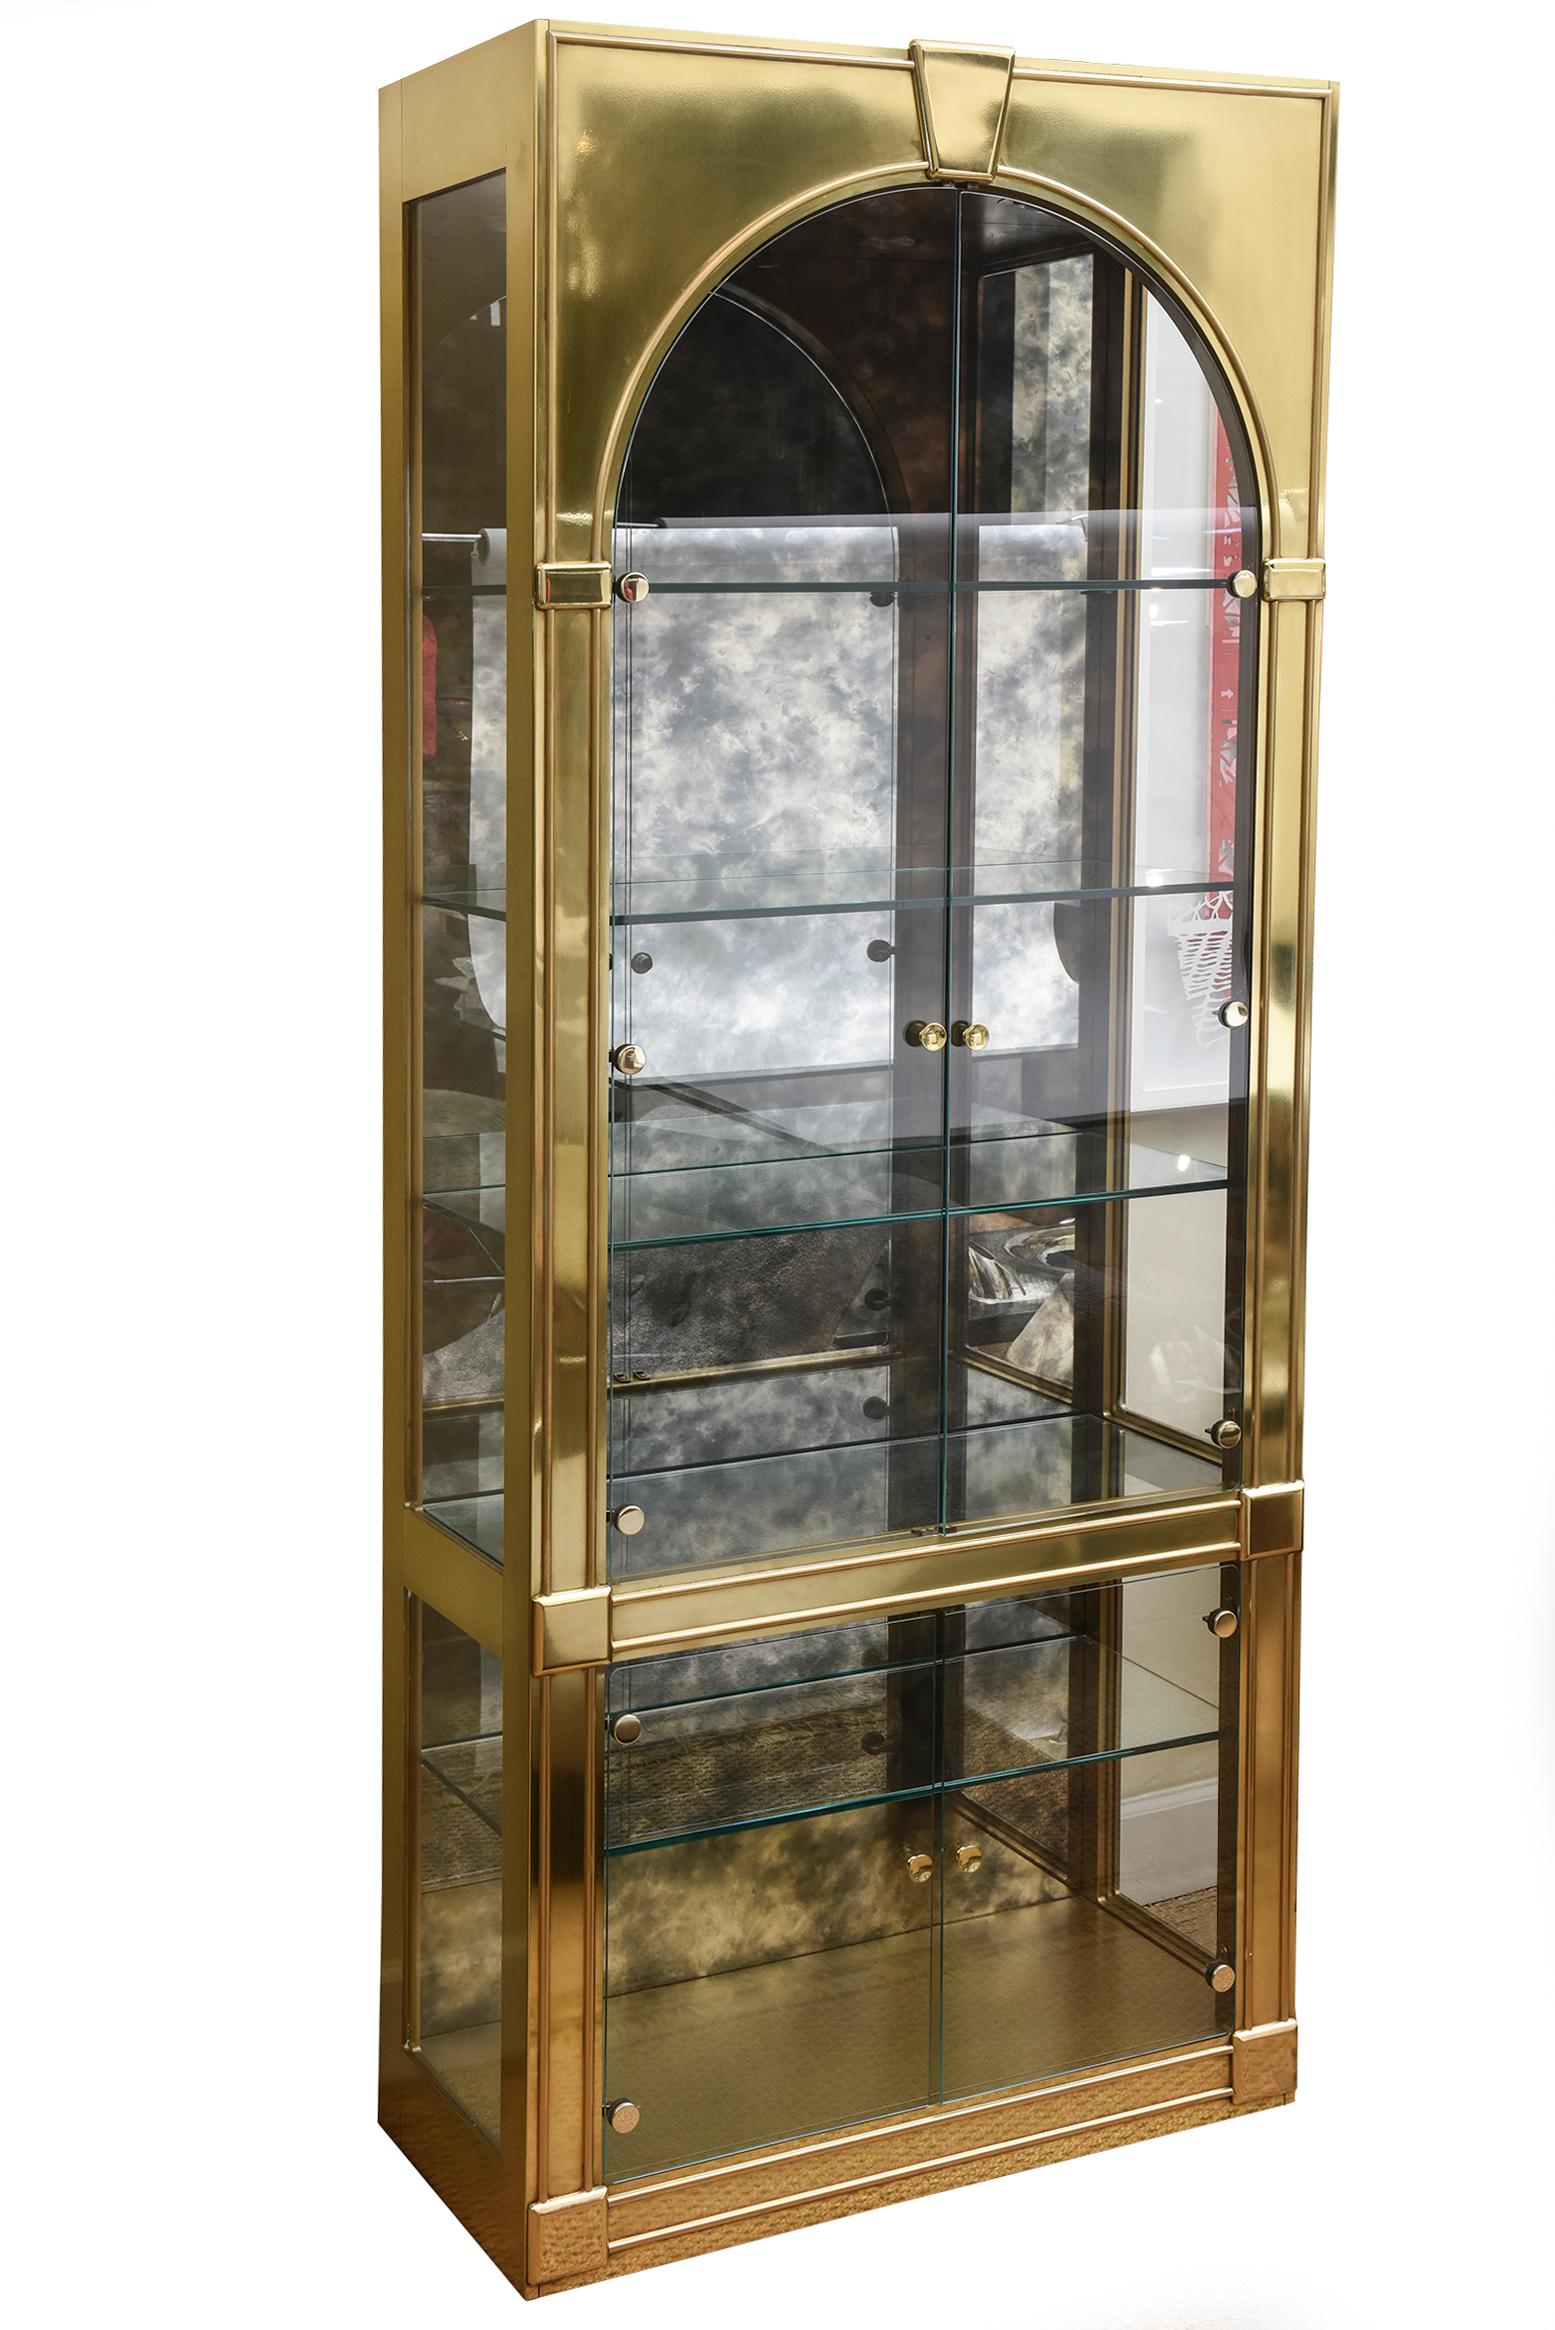 These fabulous pair of Mastercraft polished brass vintage vitrines, display cabinets or even dry bar cabinets are from the 1970s and in the Palladian style. They are Hollywood Regency meets the modern 1970s. They have been meticulously polished as